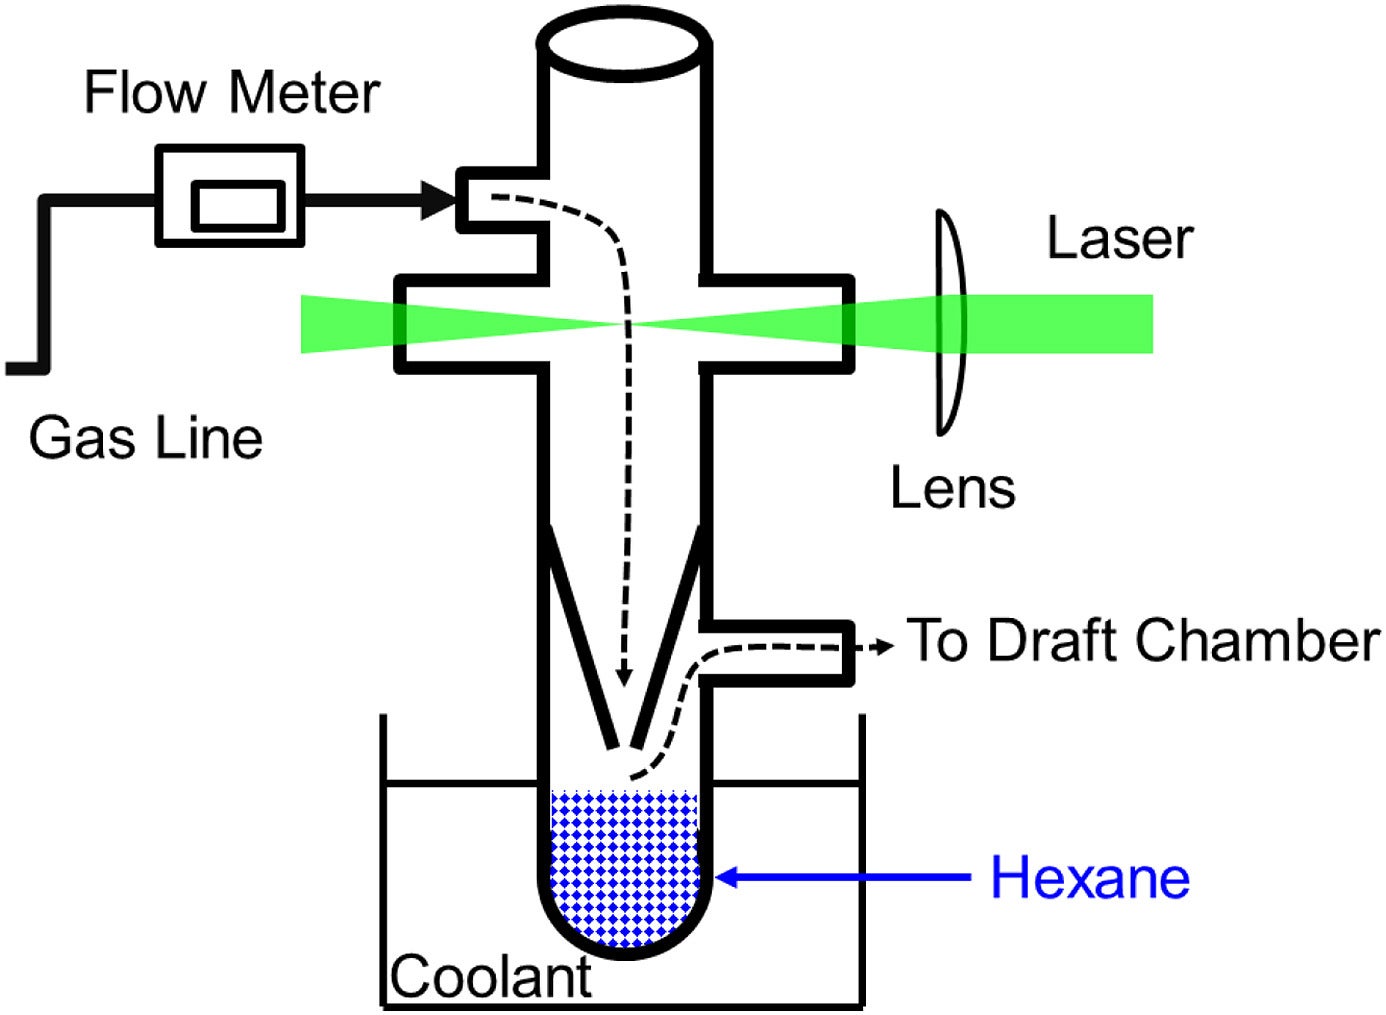 Schematic drawing of the apparatus employed in the present laser-induced breakdown (LIB) study.